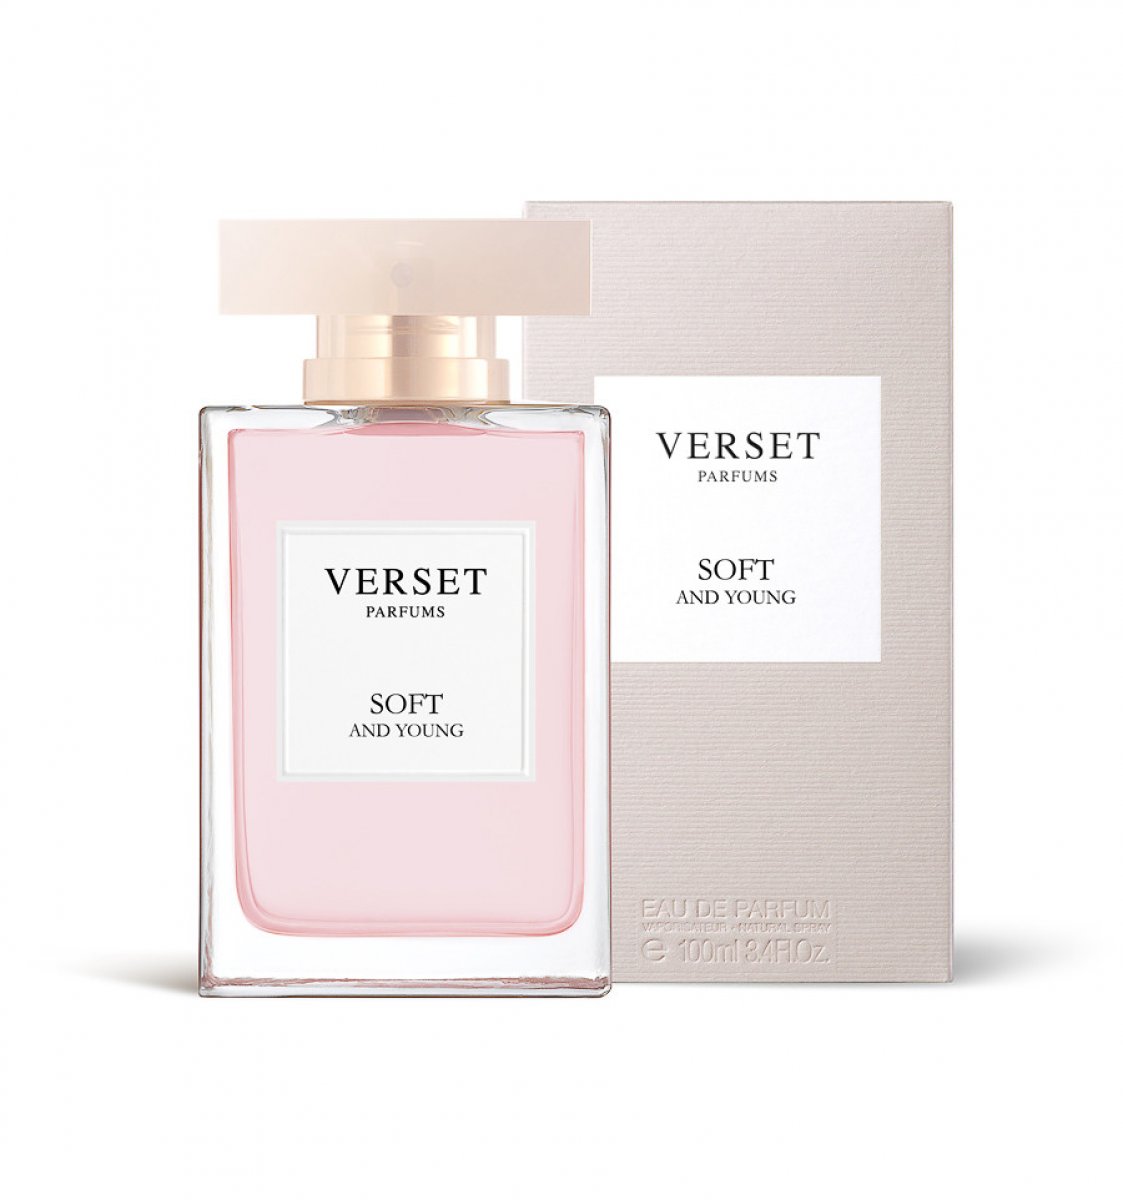 VERSET PARFUMS - SOFT AND YOUNG - 100 ml Liberamente ispirato a 